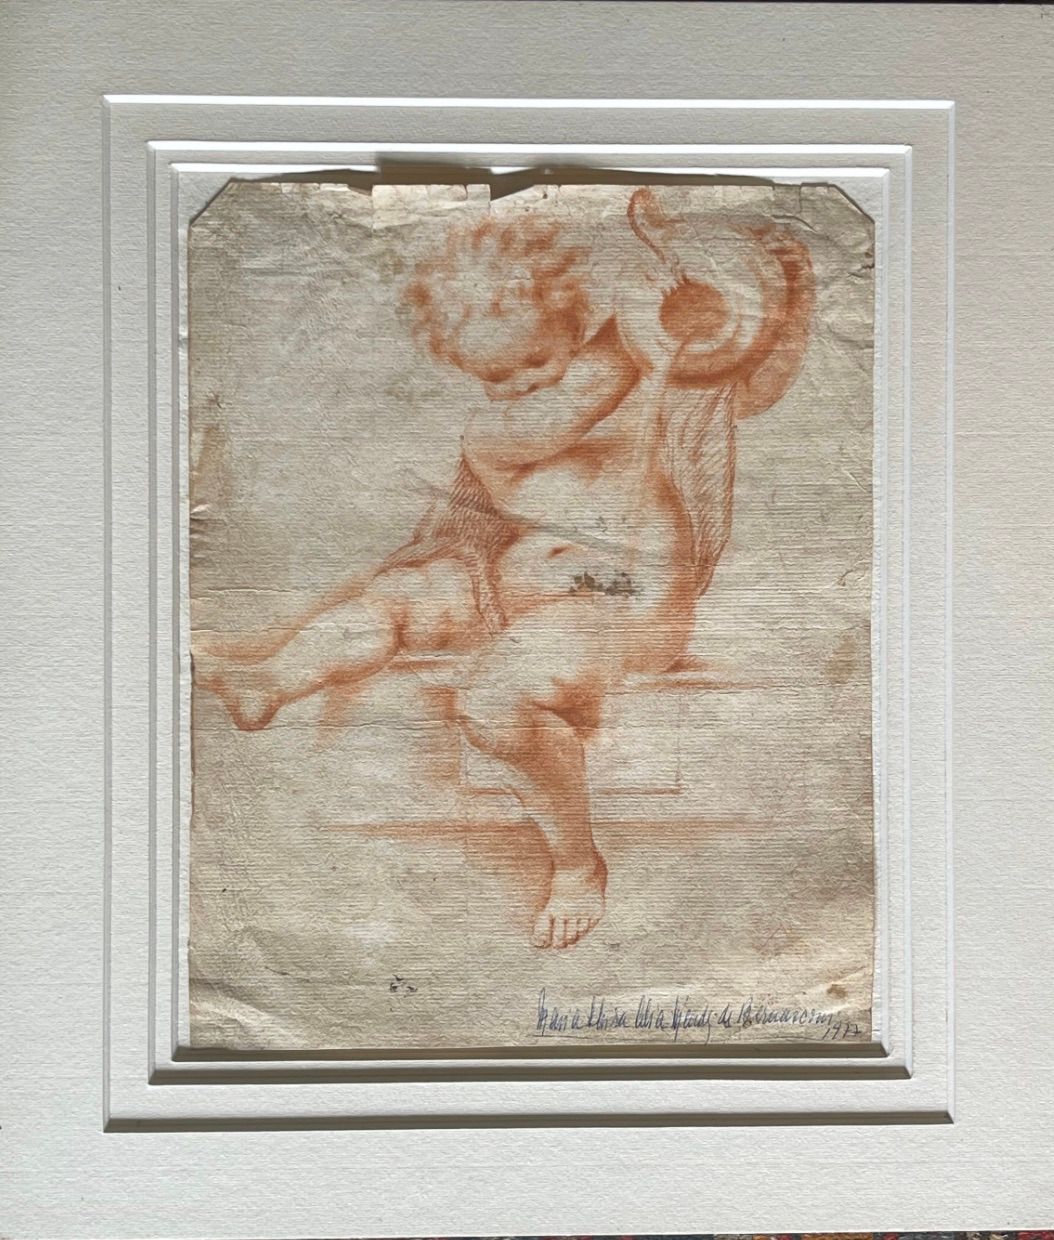 Italian School, 17th century, A Putto Holding a Vase, Red Chalk on Paper École i&hellip;